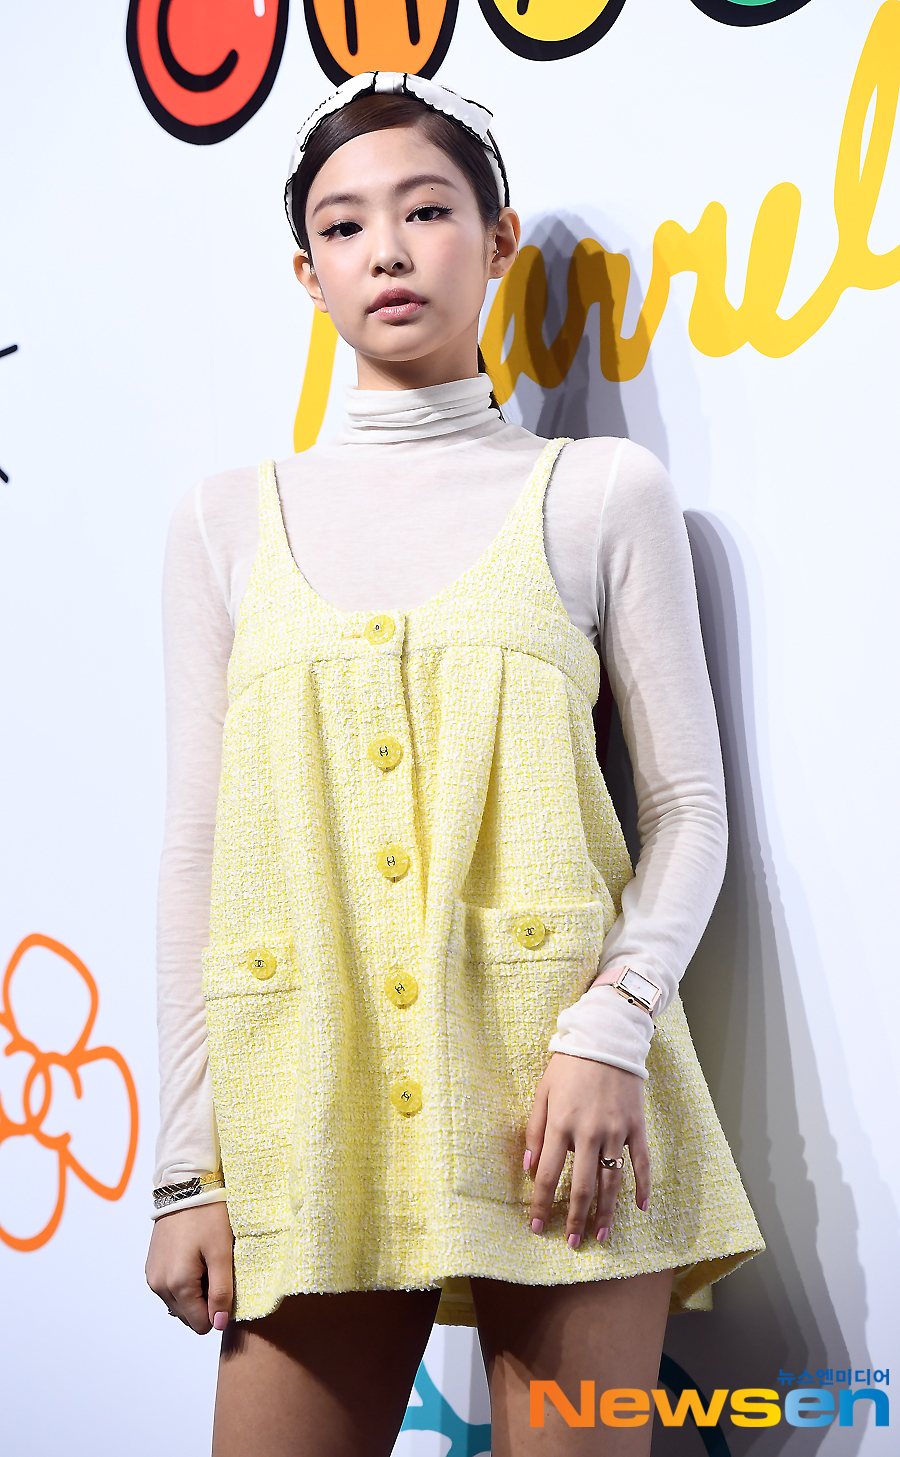 BLACKPINK Jenny Kim attended the photo wall event commemorating the launch of the Chanel X Purell Capsule Collection held at Daelim Warehouse in Seongsu-dong, Seongdong-gu, Seoul on the afternoon of March 28th.Jung Yu-jin